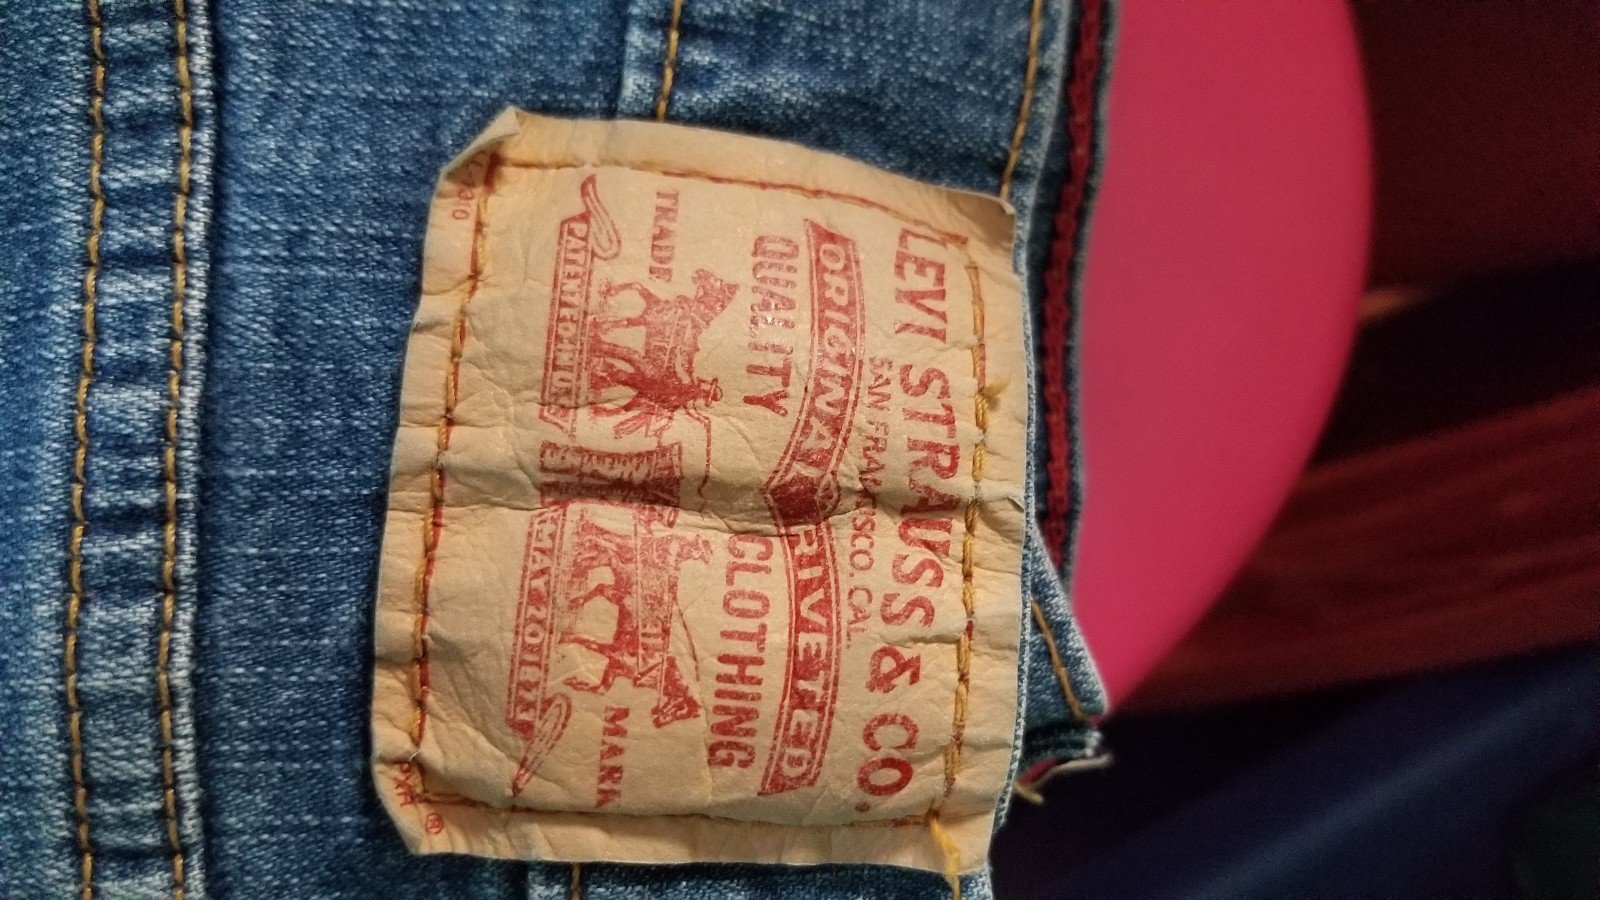 Great Levis jeans o9jqUqosl well sale